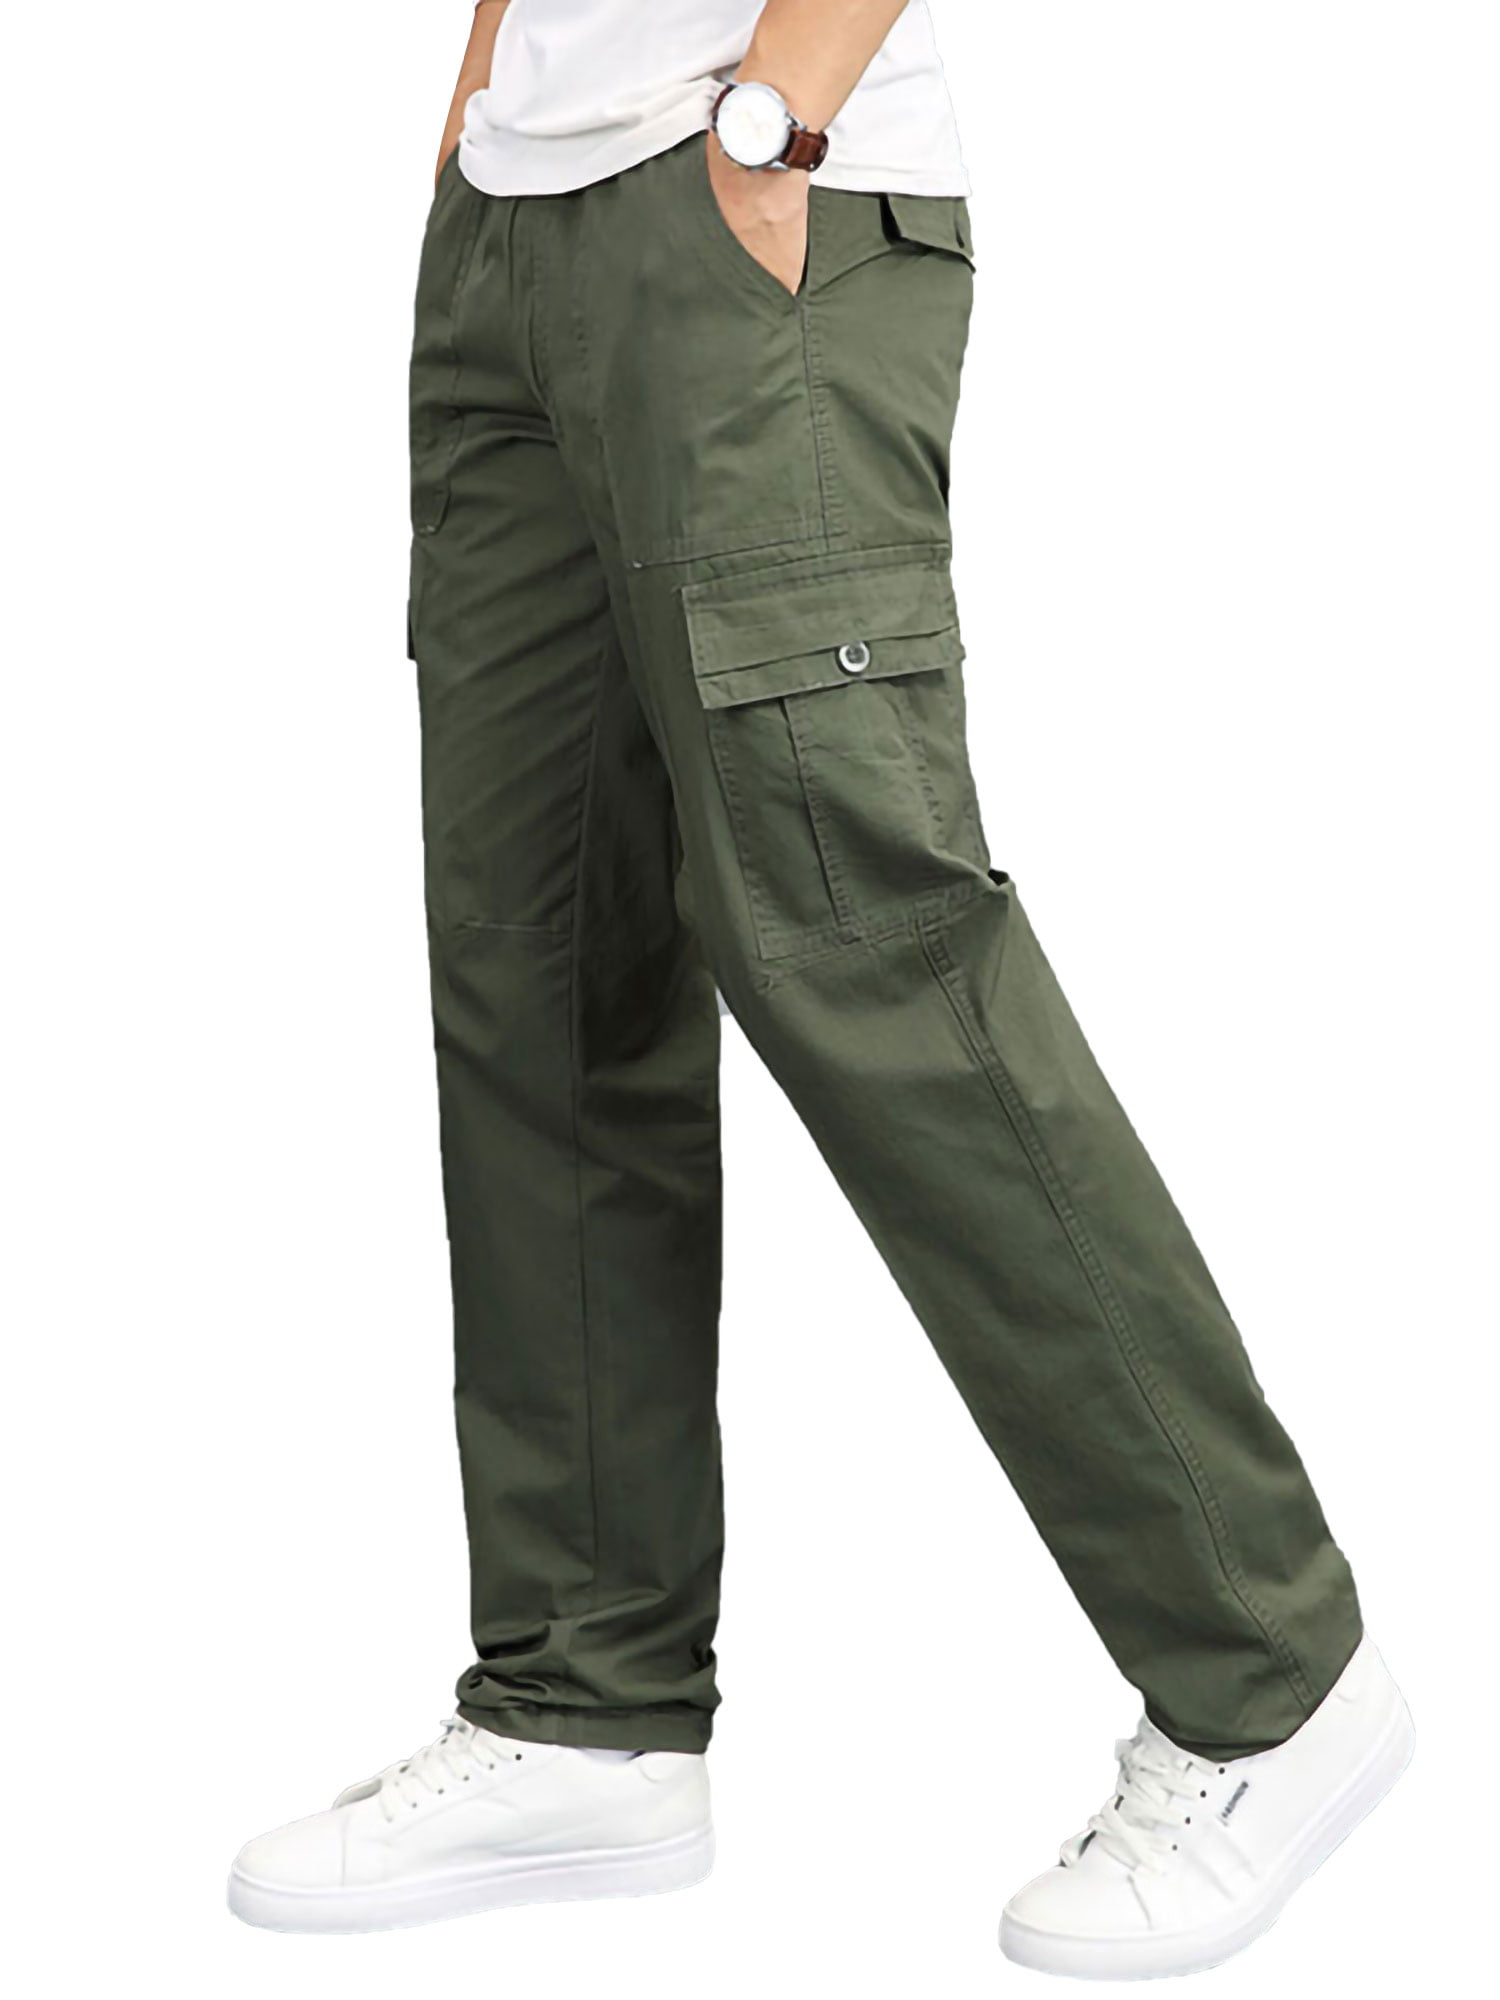 YUNY Men Drawstring Zip-up Pockets Collection Outdoor Cargo Pants 1 L